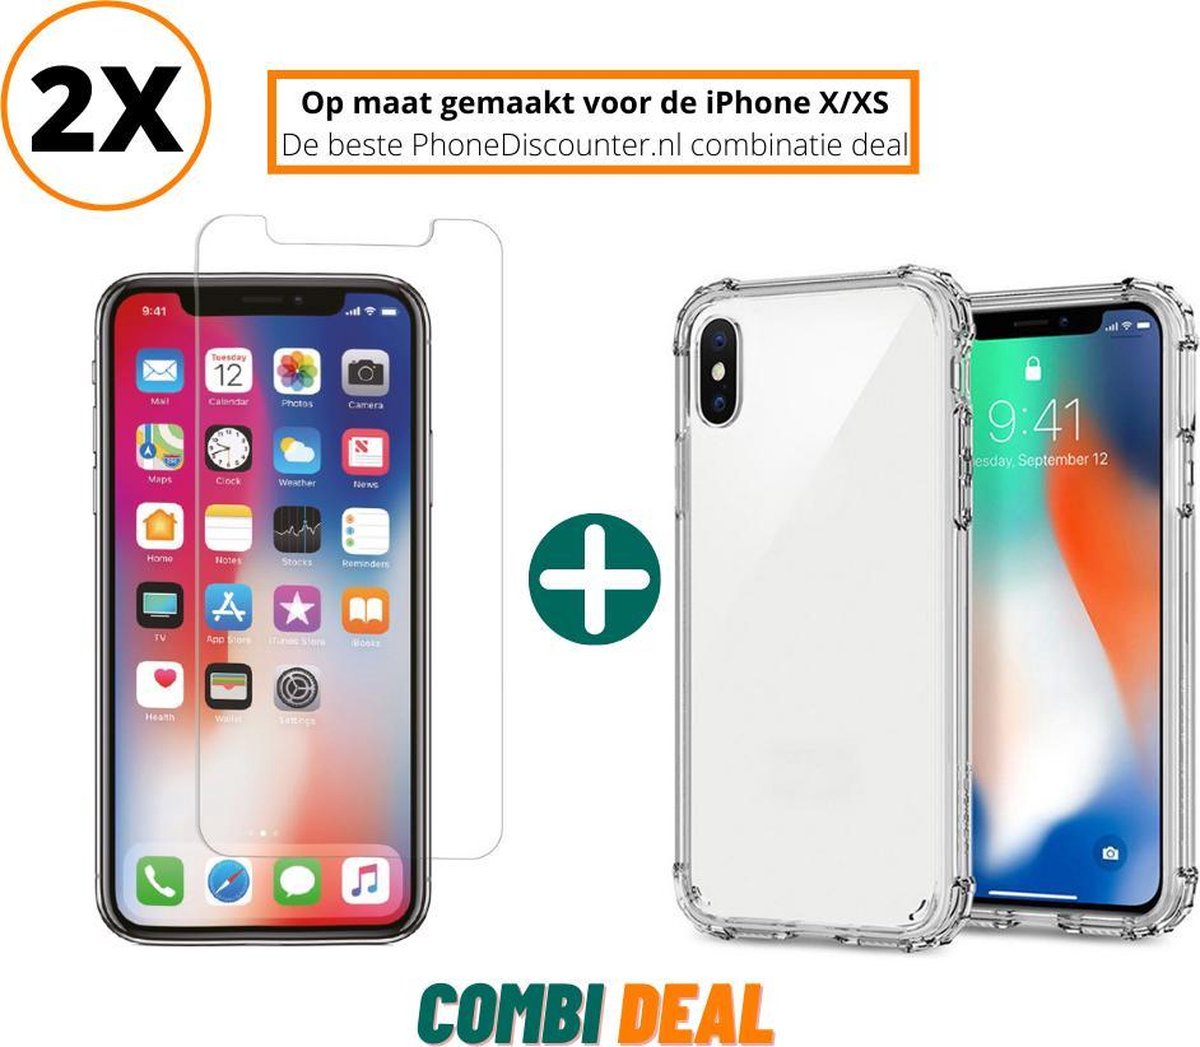 iphone x anti shock hoes | iPhone X A1901 siliconen case 2x | iPhone X anti shock case transparant | 2x beschermhoes iphone x apple | iPhone X schokbestendige hoes + 2x iPhone X tempered glass screenprotector